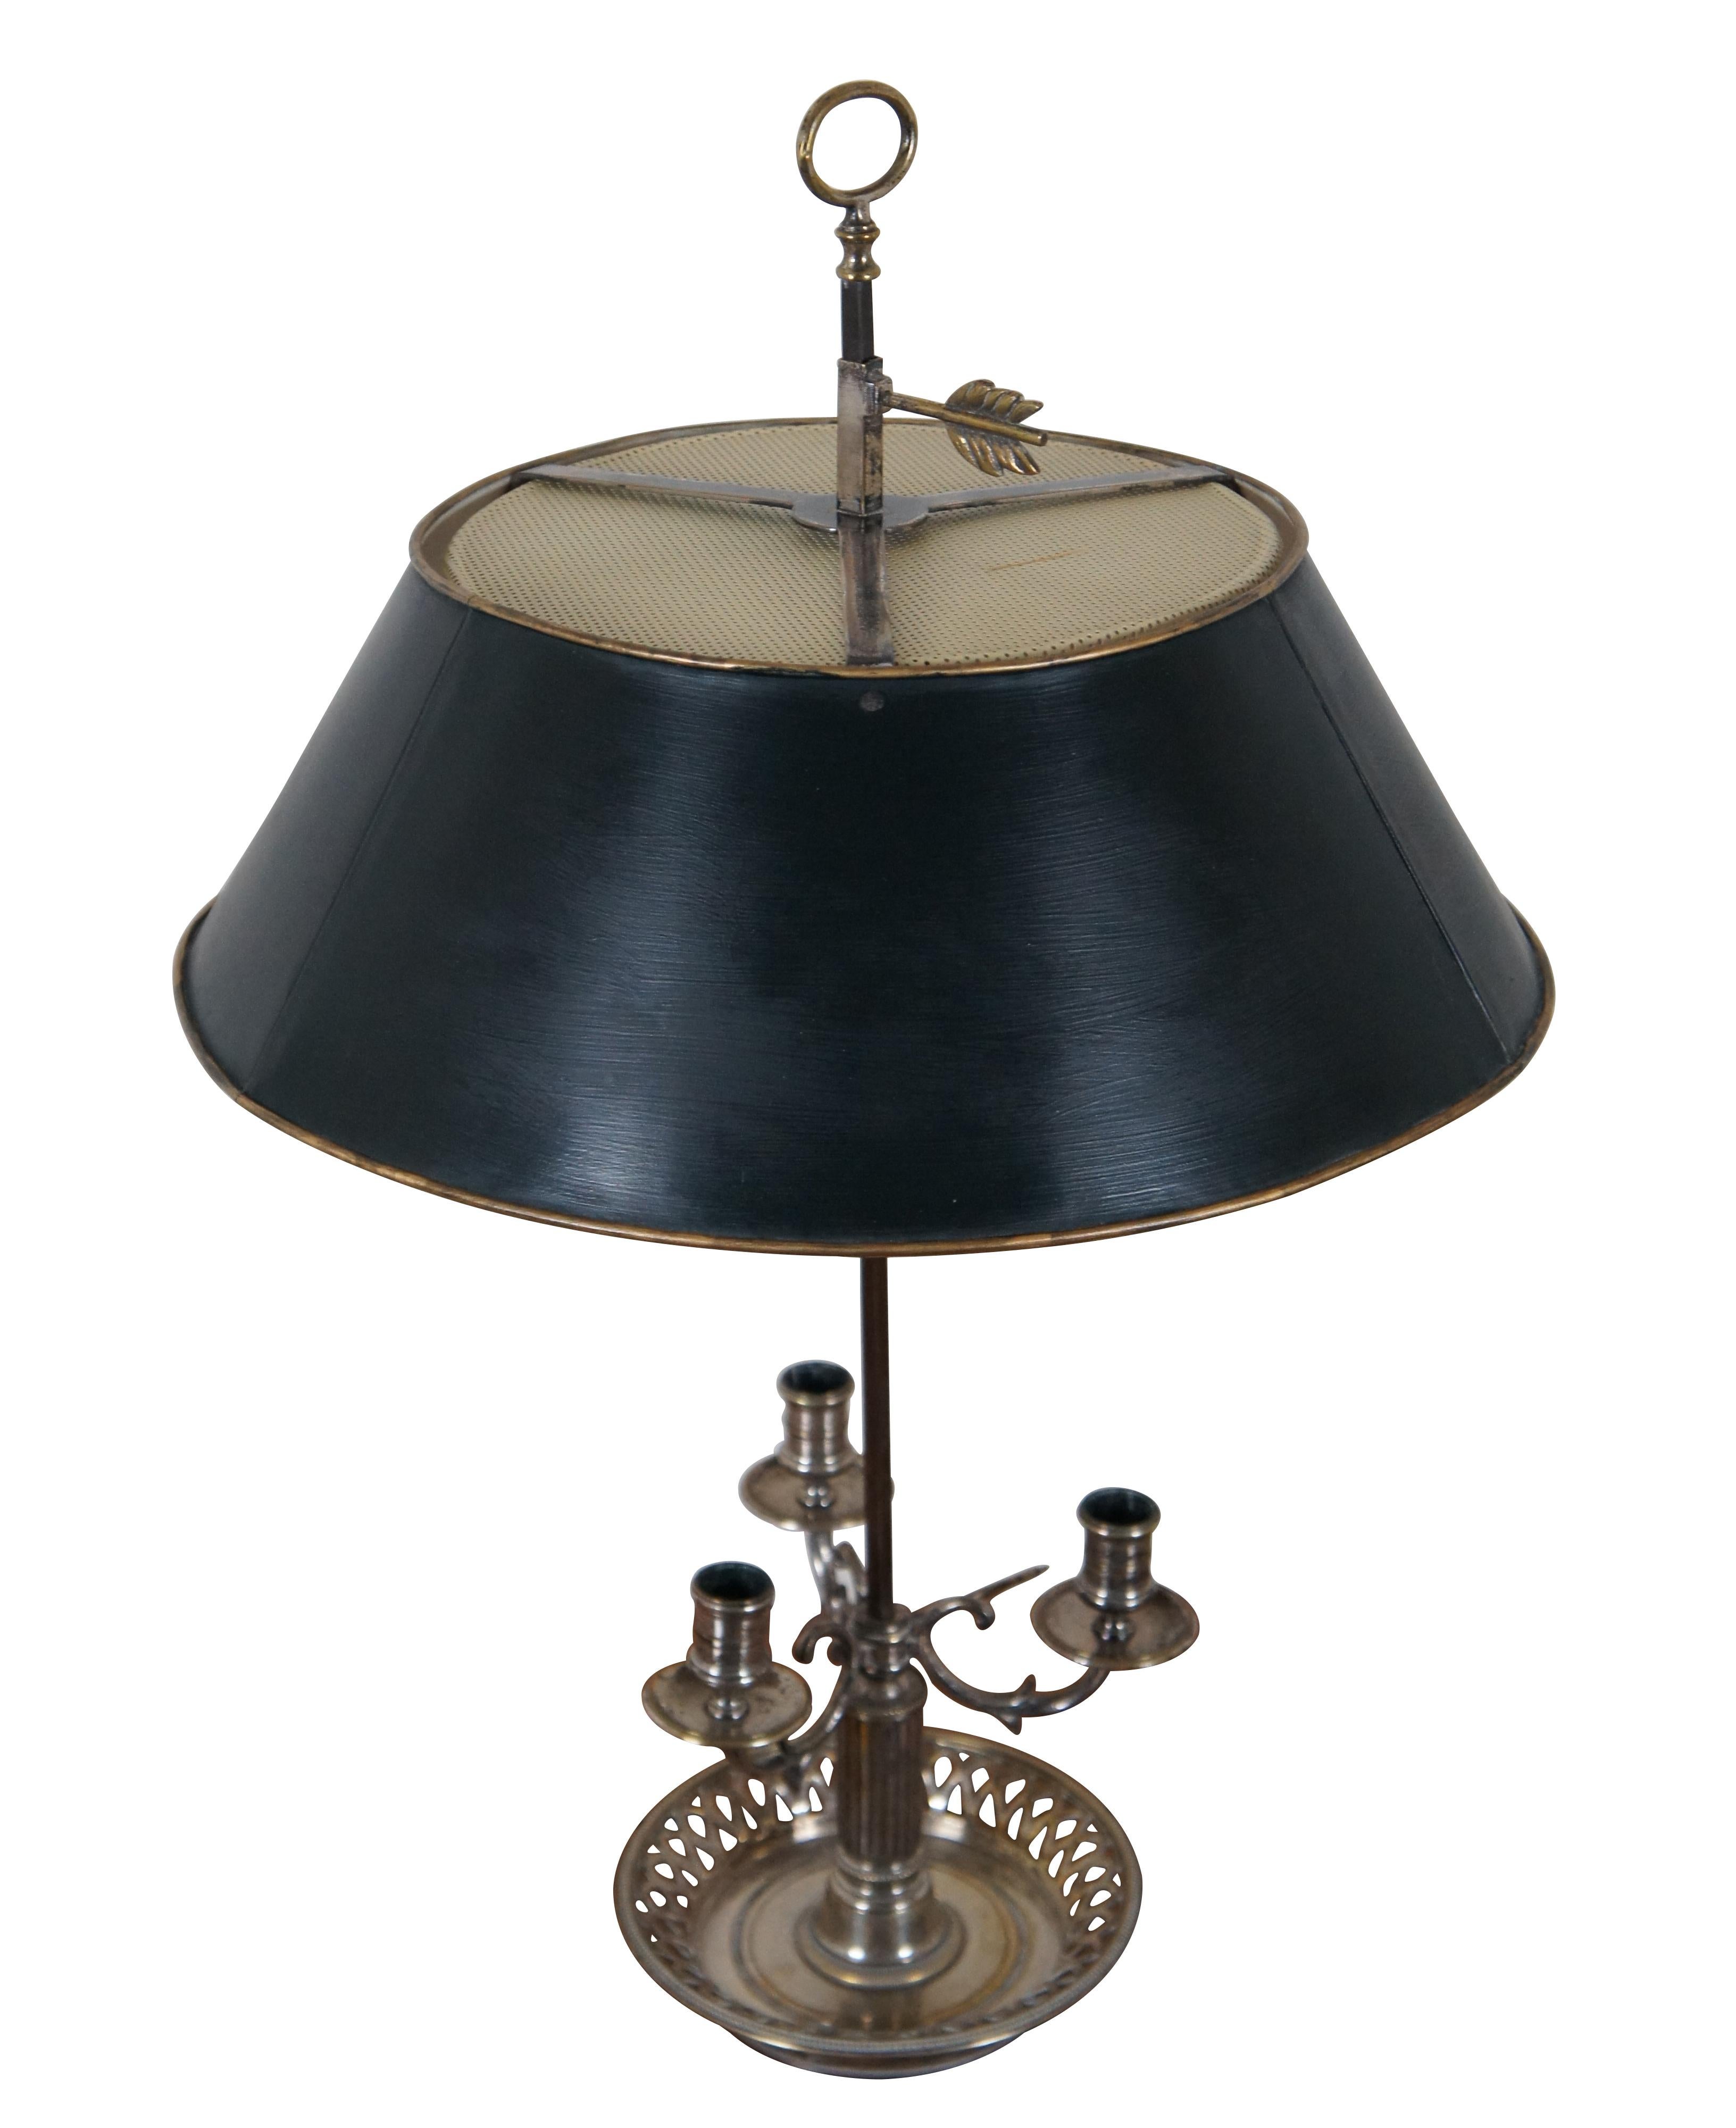 Antique French Neoclassical Bouillotte / Directoire / Hot Water Bottle silver plate three light table lamp, featuring a pierced / reticulated base with a fluted column supporting a three arm candelabra (adjustable height) with ring finial, arrow